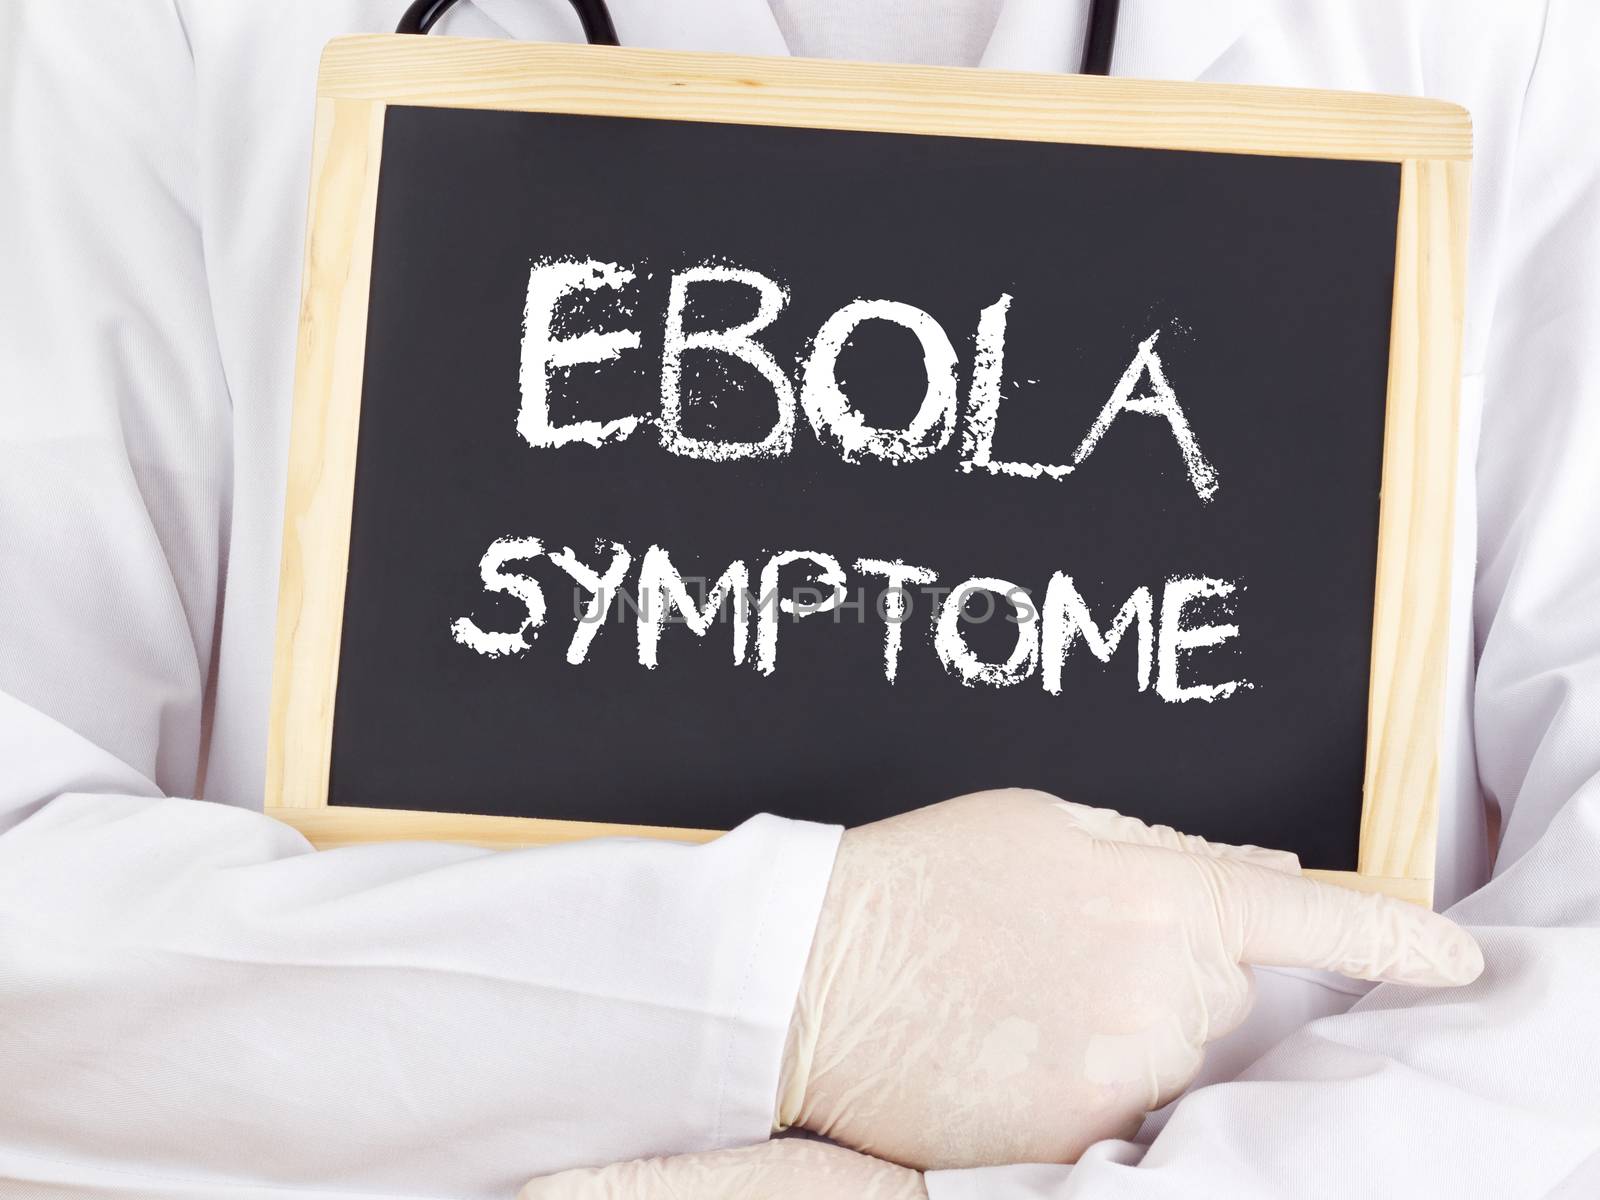 Doctor shows information: Ebola symptoms in german by gwolters